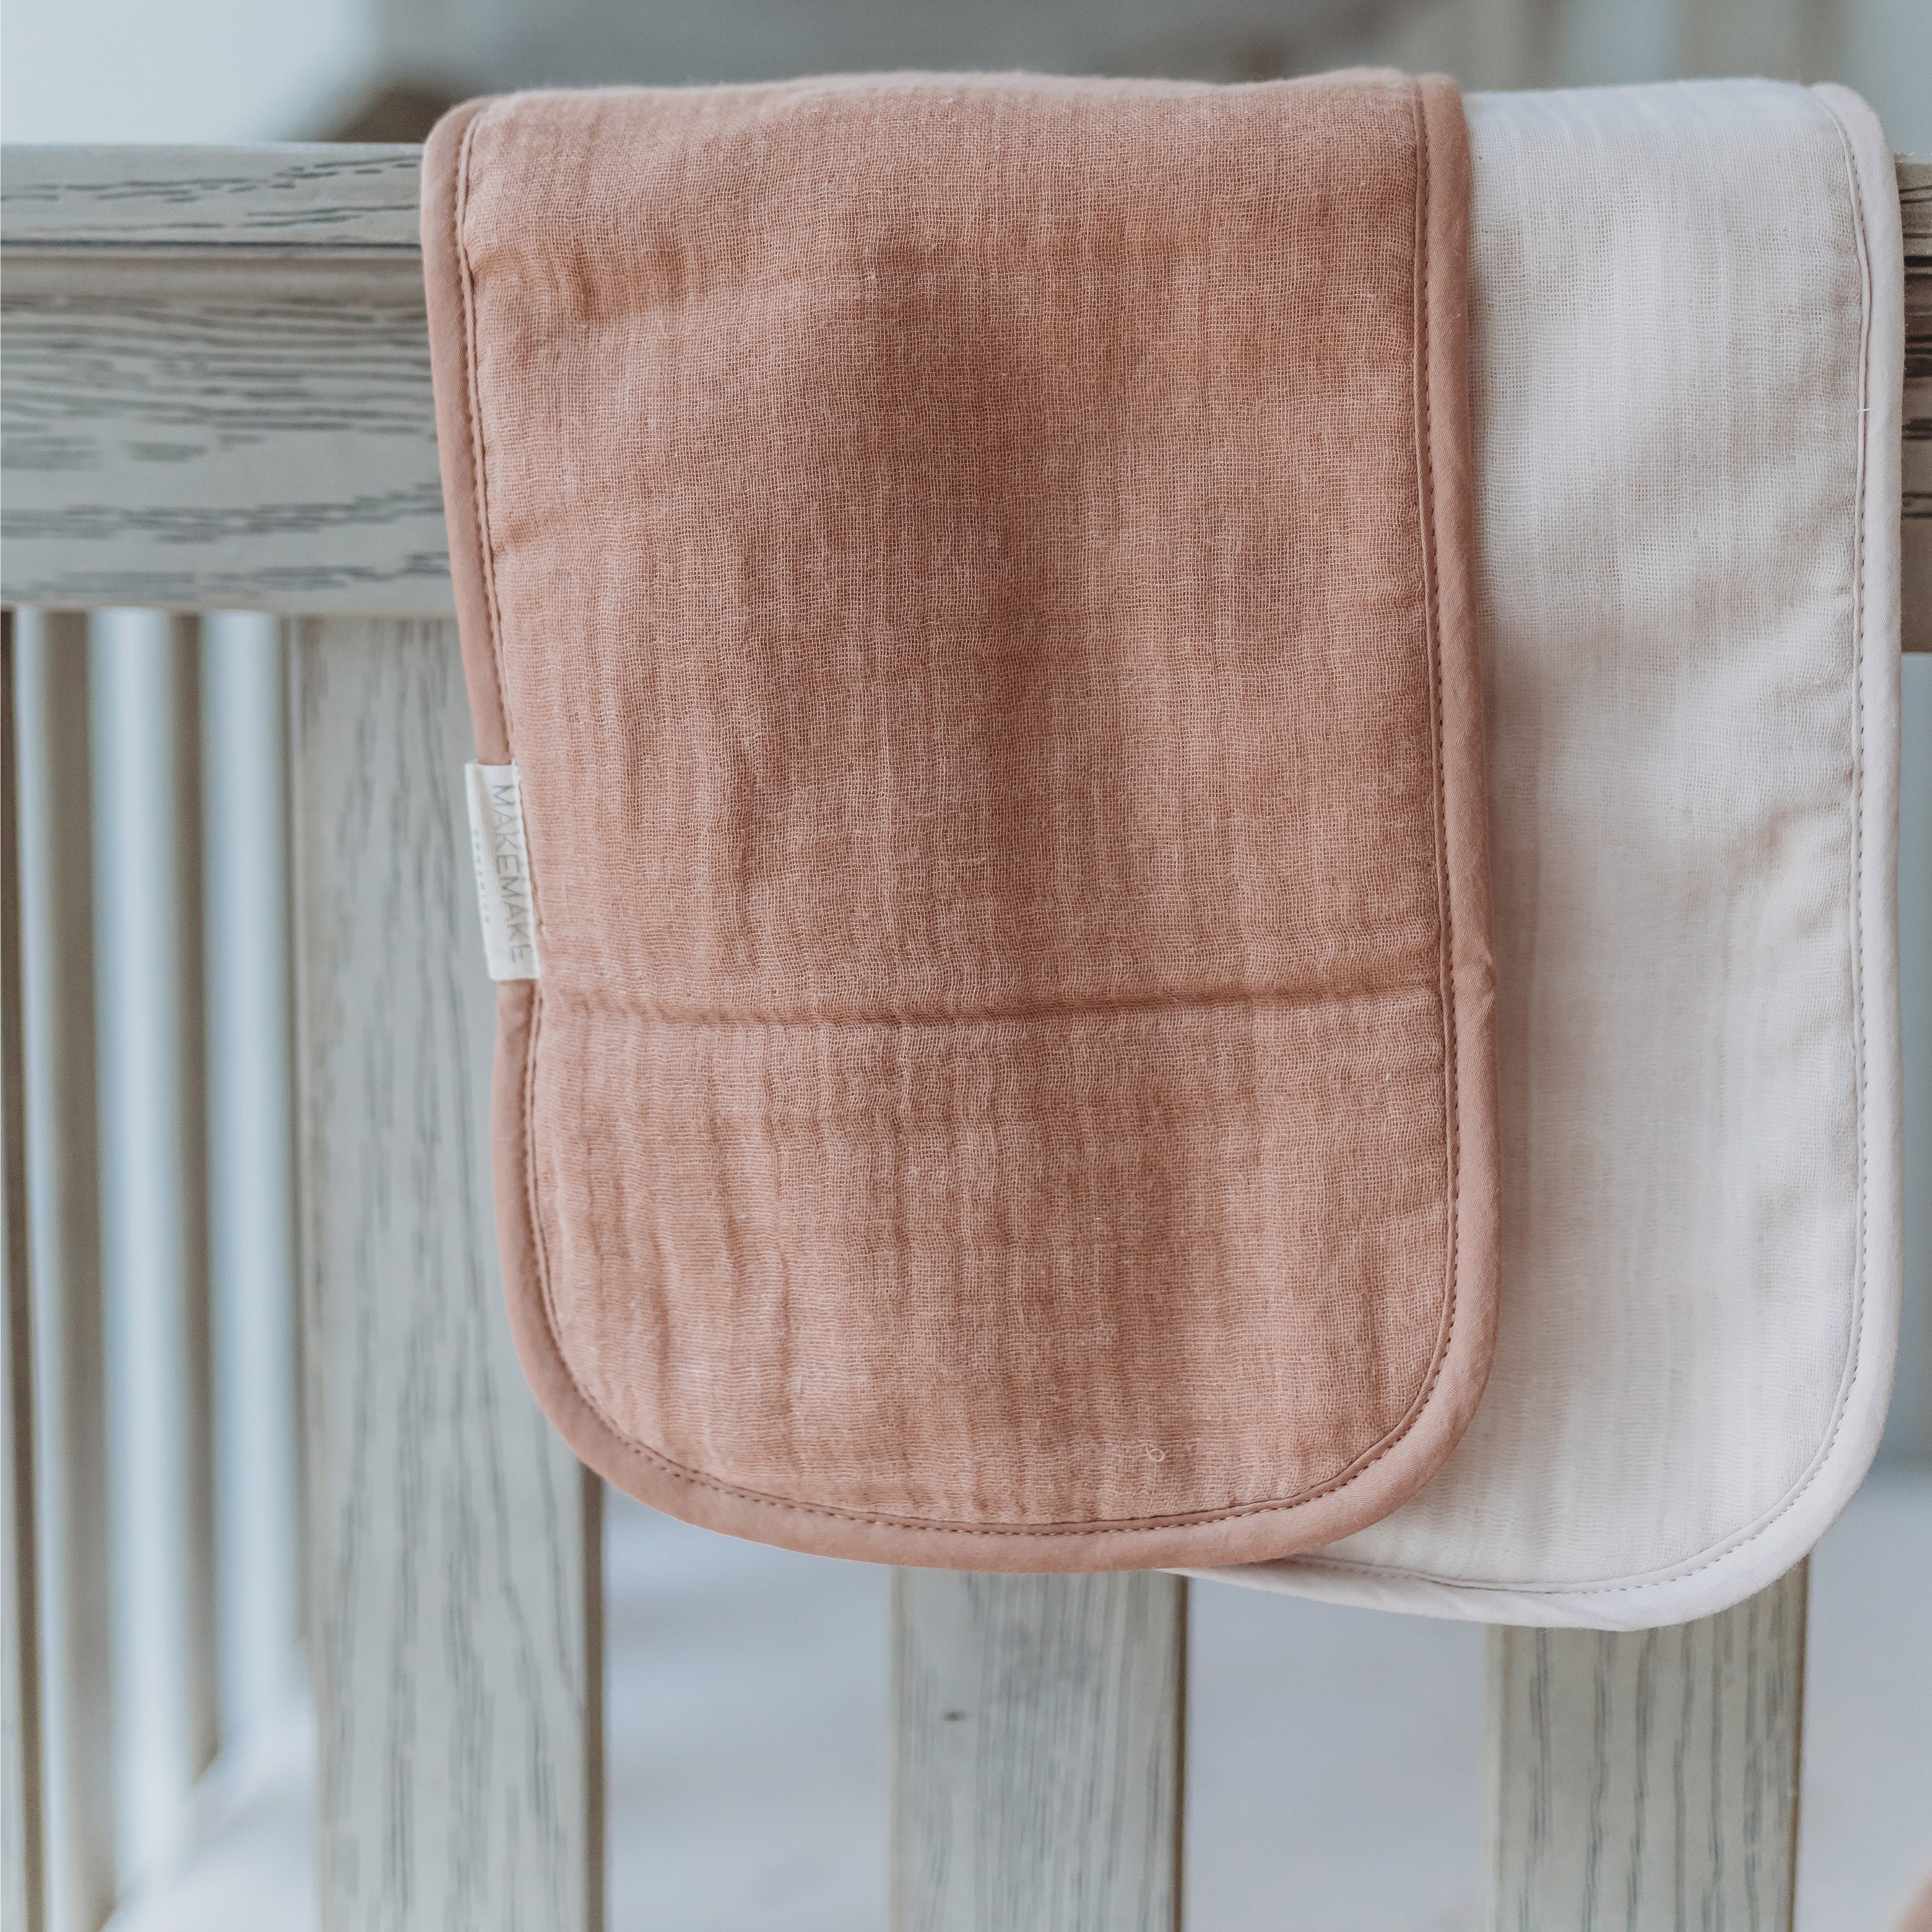 Two Organic Cotton Muslin Burp Cloths in Blush Oat & Pecan by Makemake Organics hanging on a wooden rail, one in a blush pink and the other in a soft white, both with textured surfaces.